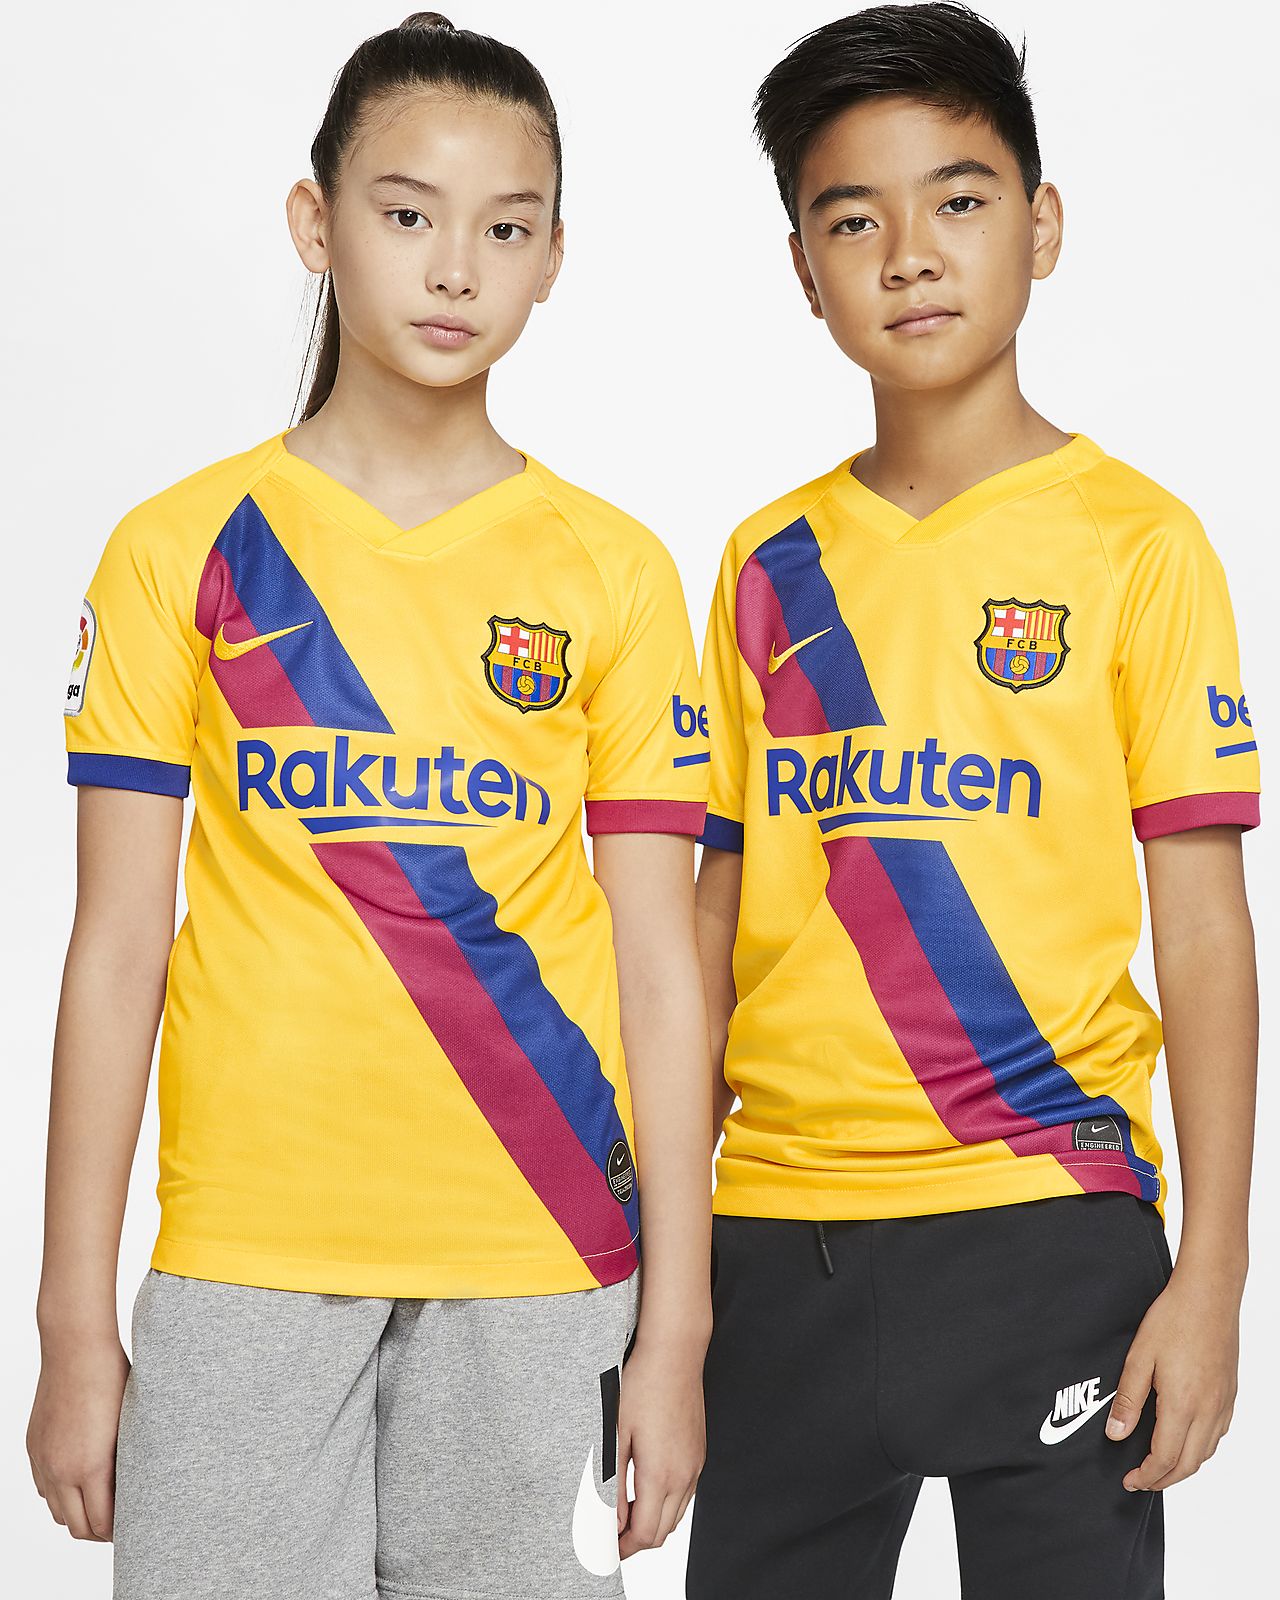 barca youth jersey